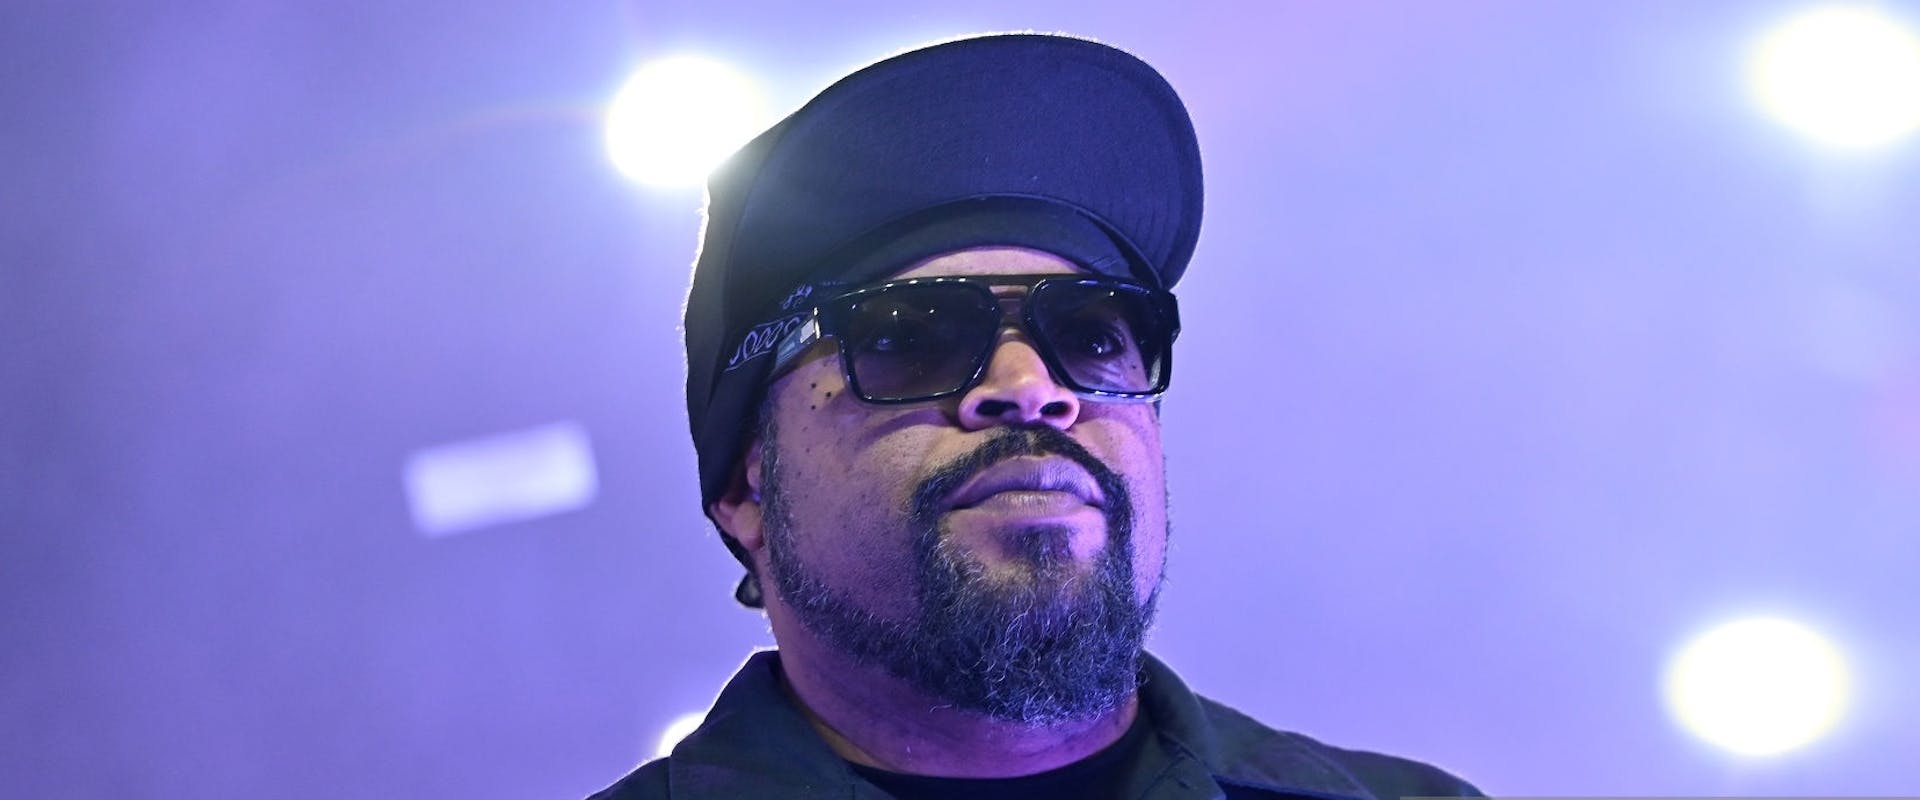 https://images.prismic.io/rockthebells/a9dd5676-e9ba-41bd-938f-a3567157567d_gettyimages-1354585175-2048x2048_ice_cube_temp.jpeg?auto=compress,format&rect=0,0,1920,800&w=1920&h=800